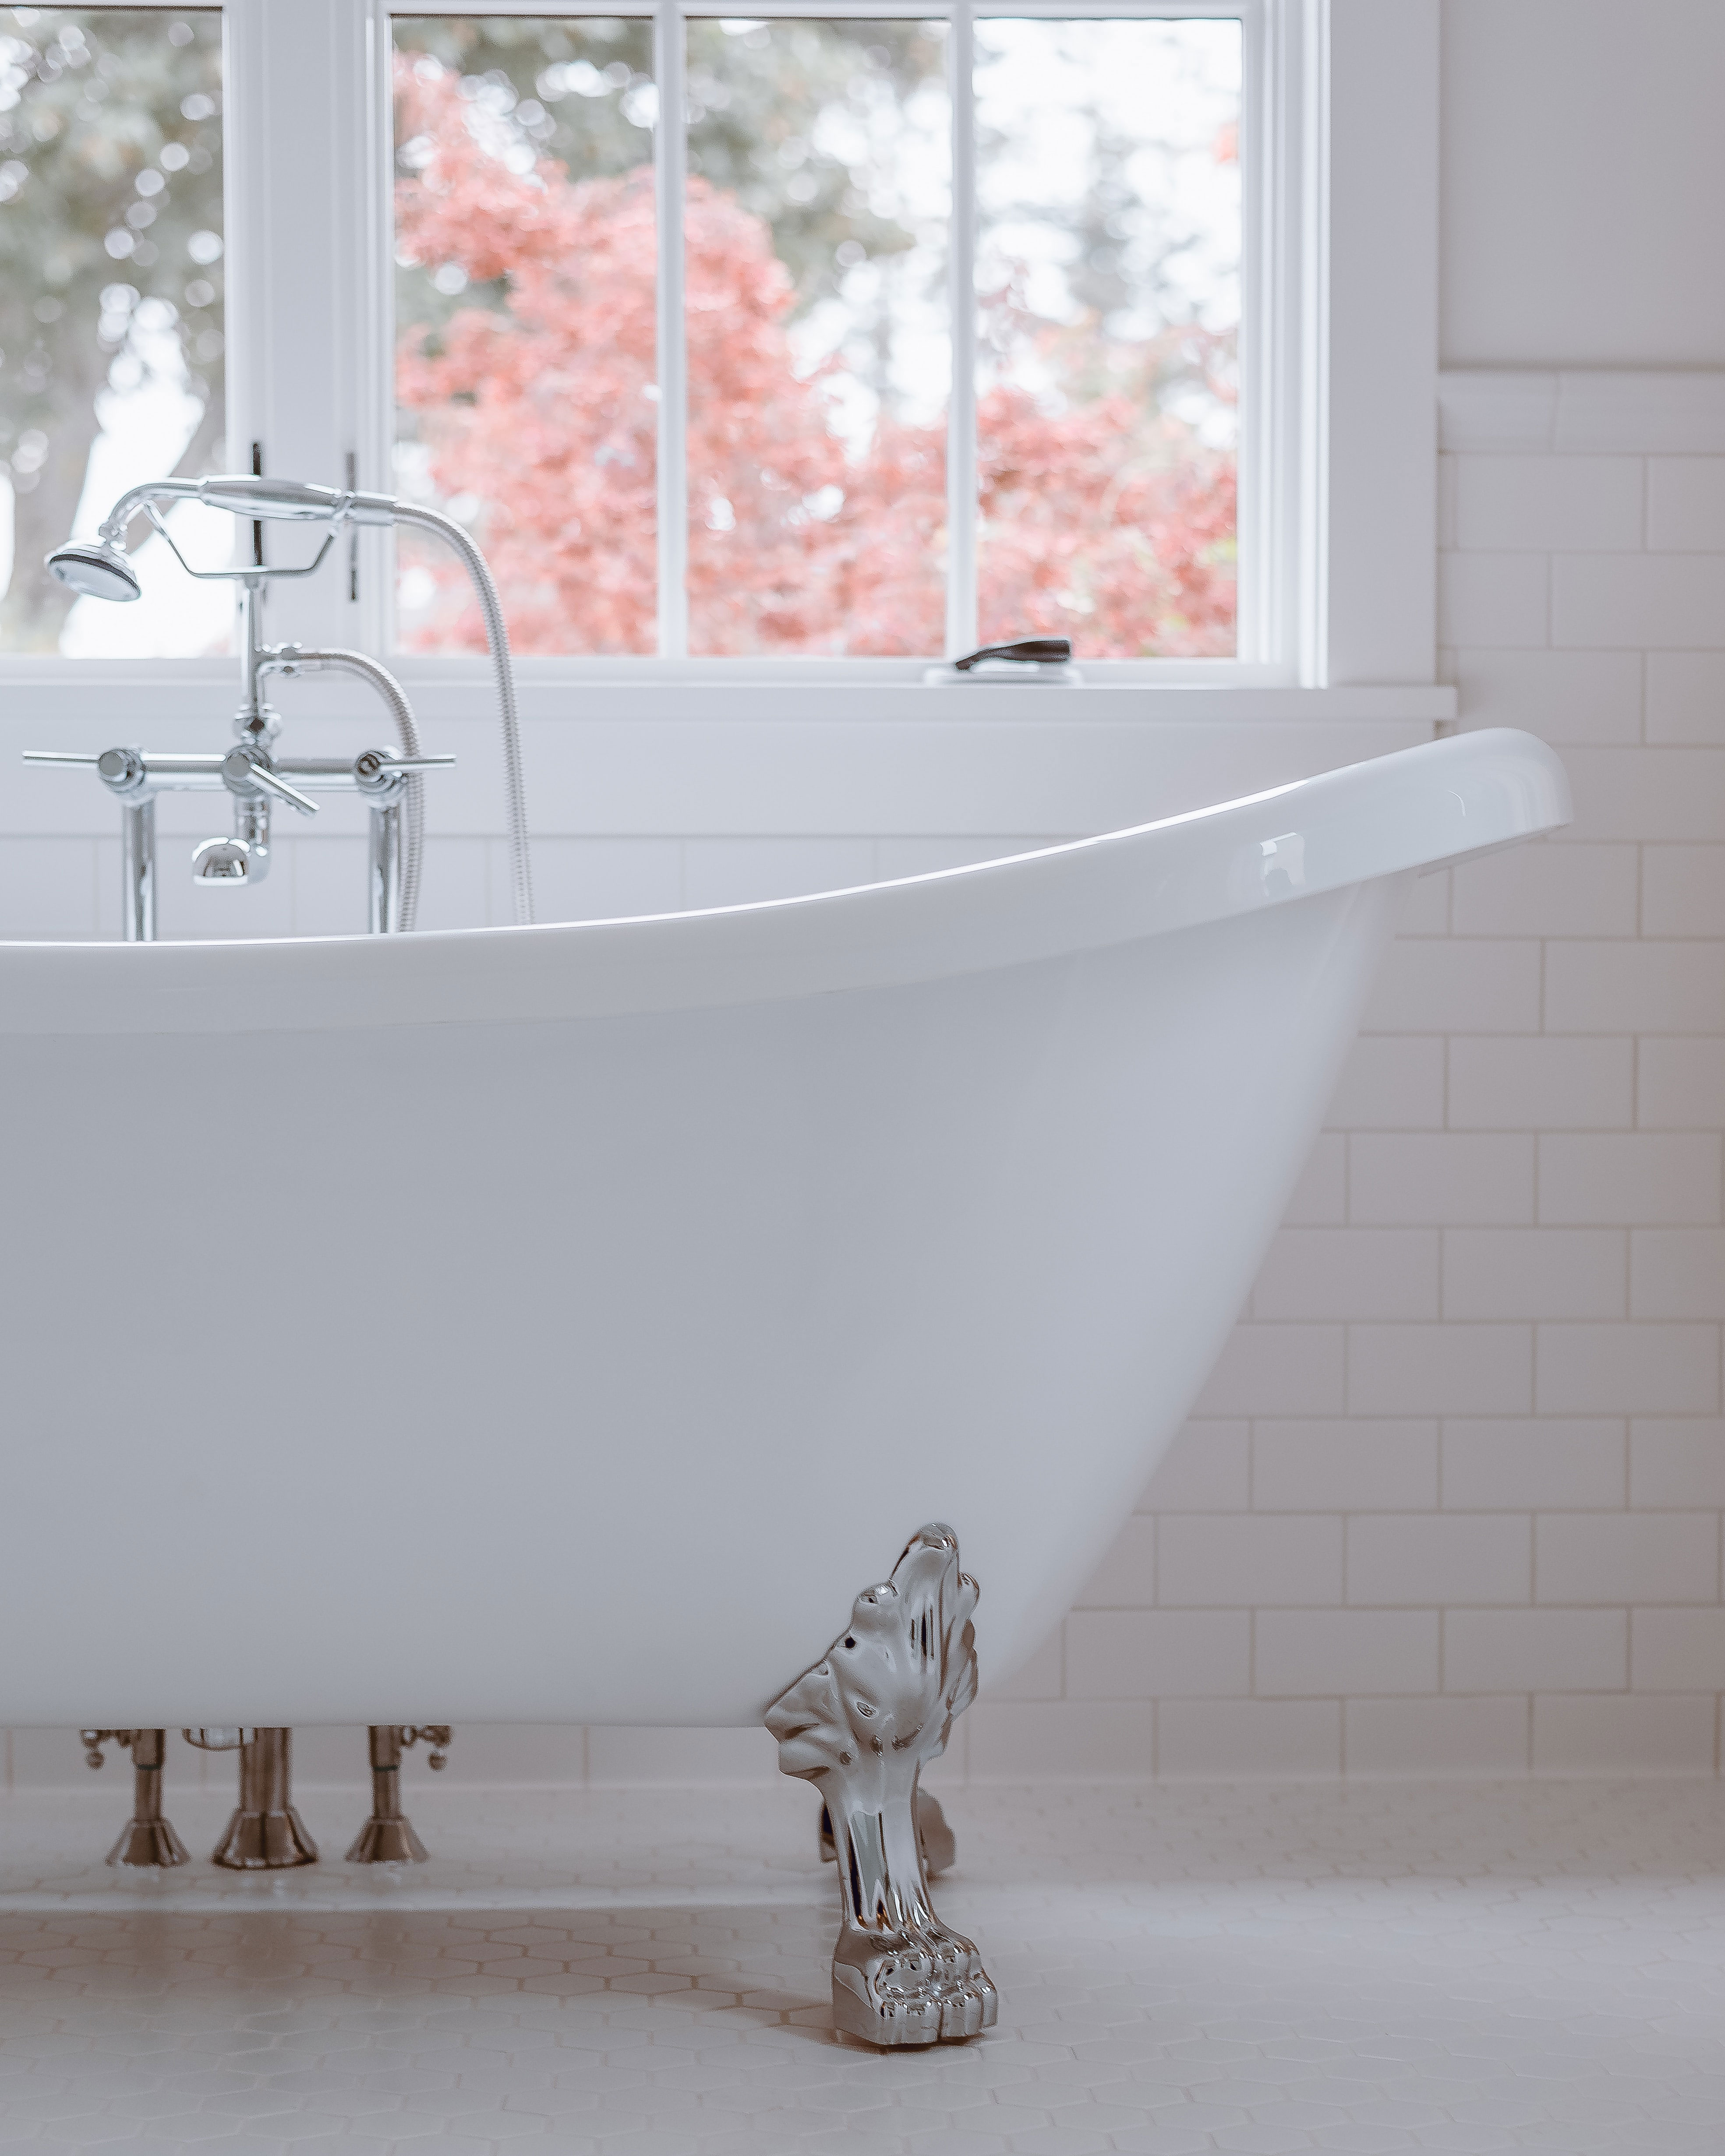 A white clawfoot tub on a white tile floor and white tile walls.